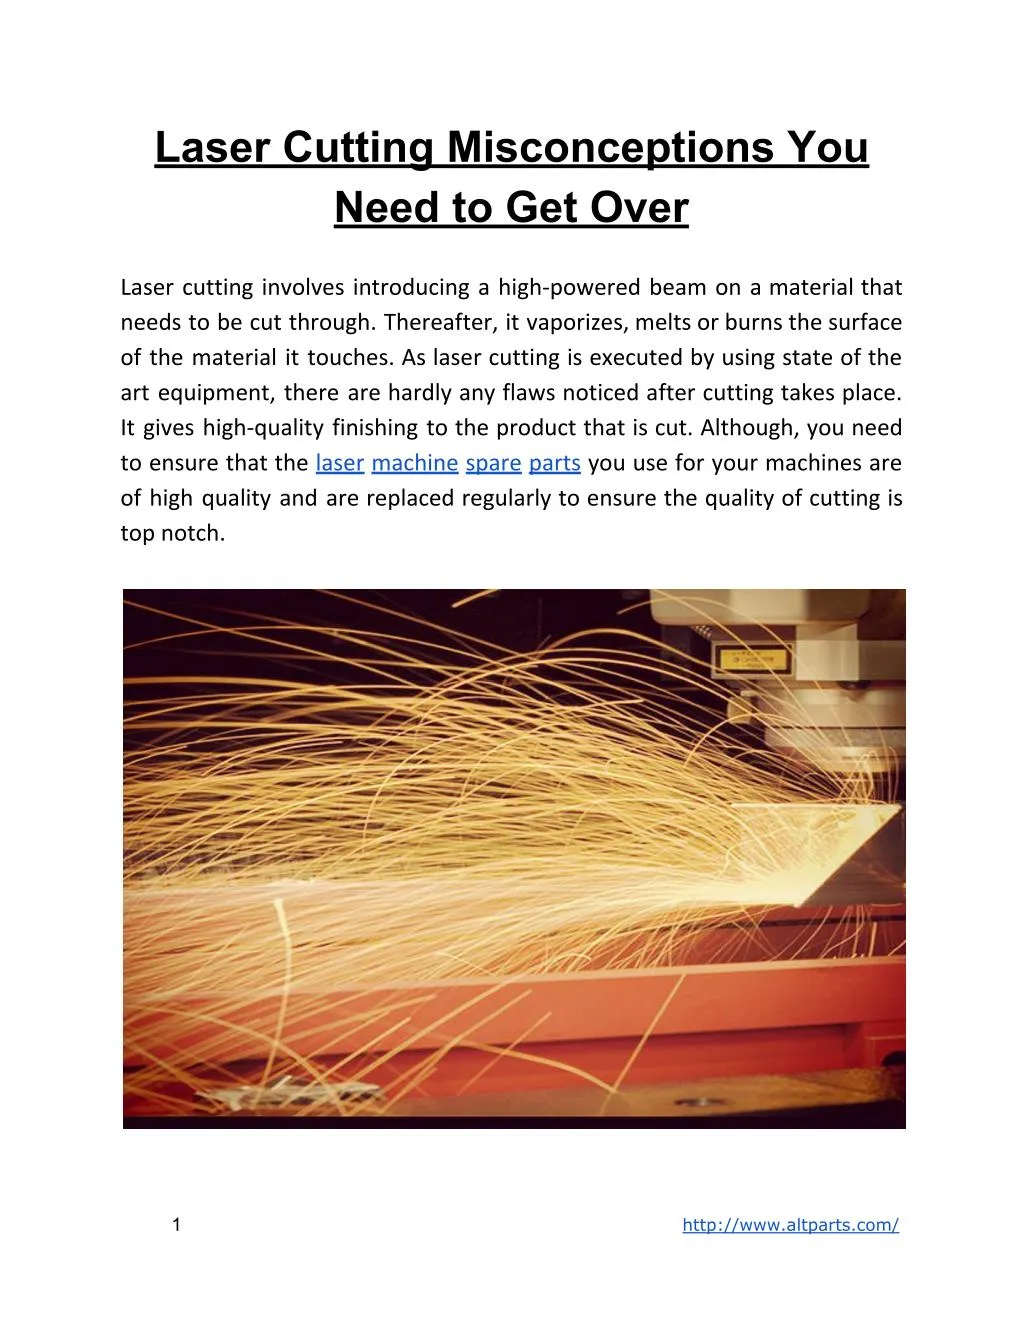 laser cutting misconceptions you need to get over